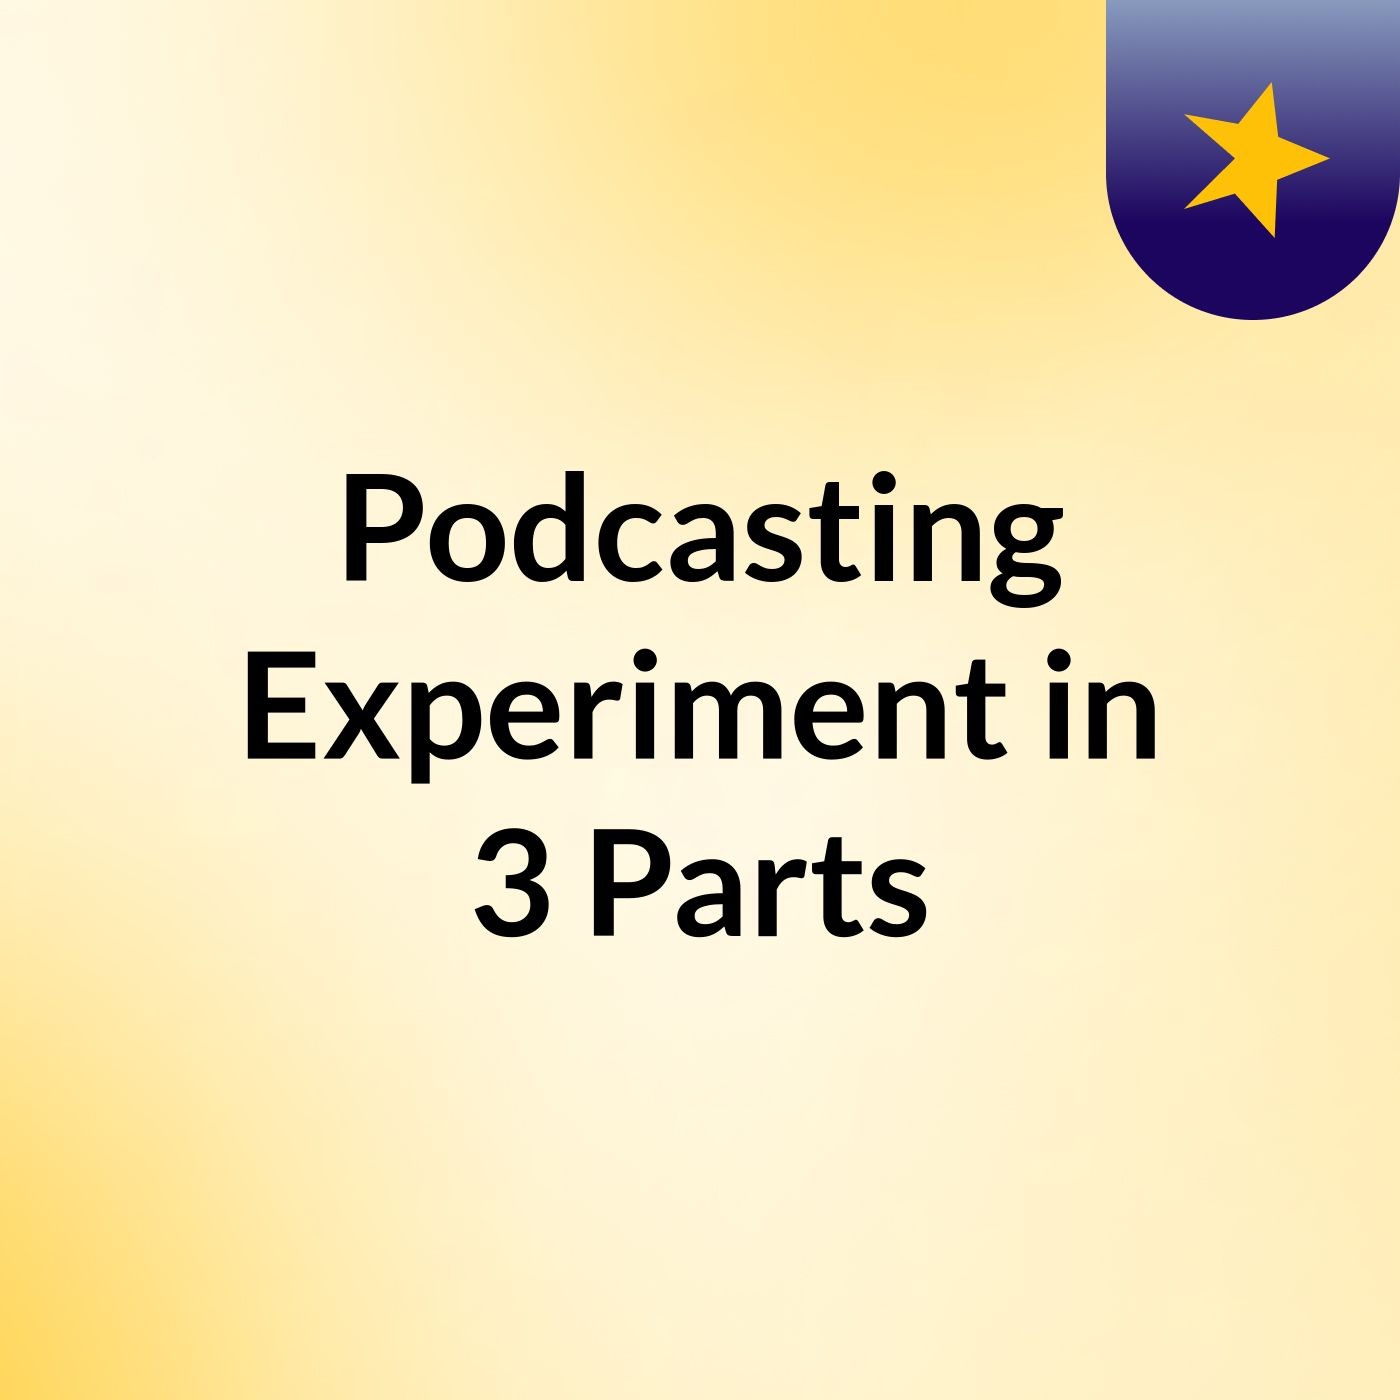 Podcasting Experiment in 3 Parts